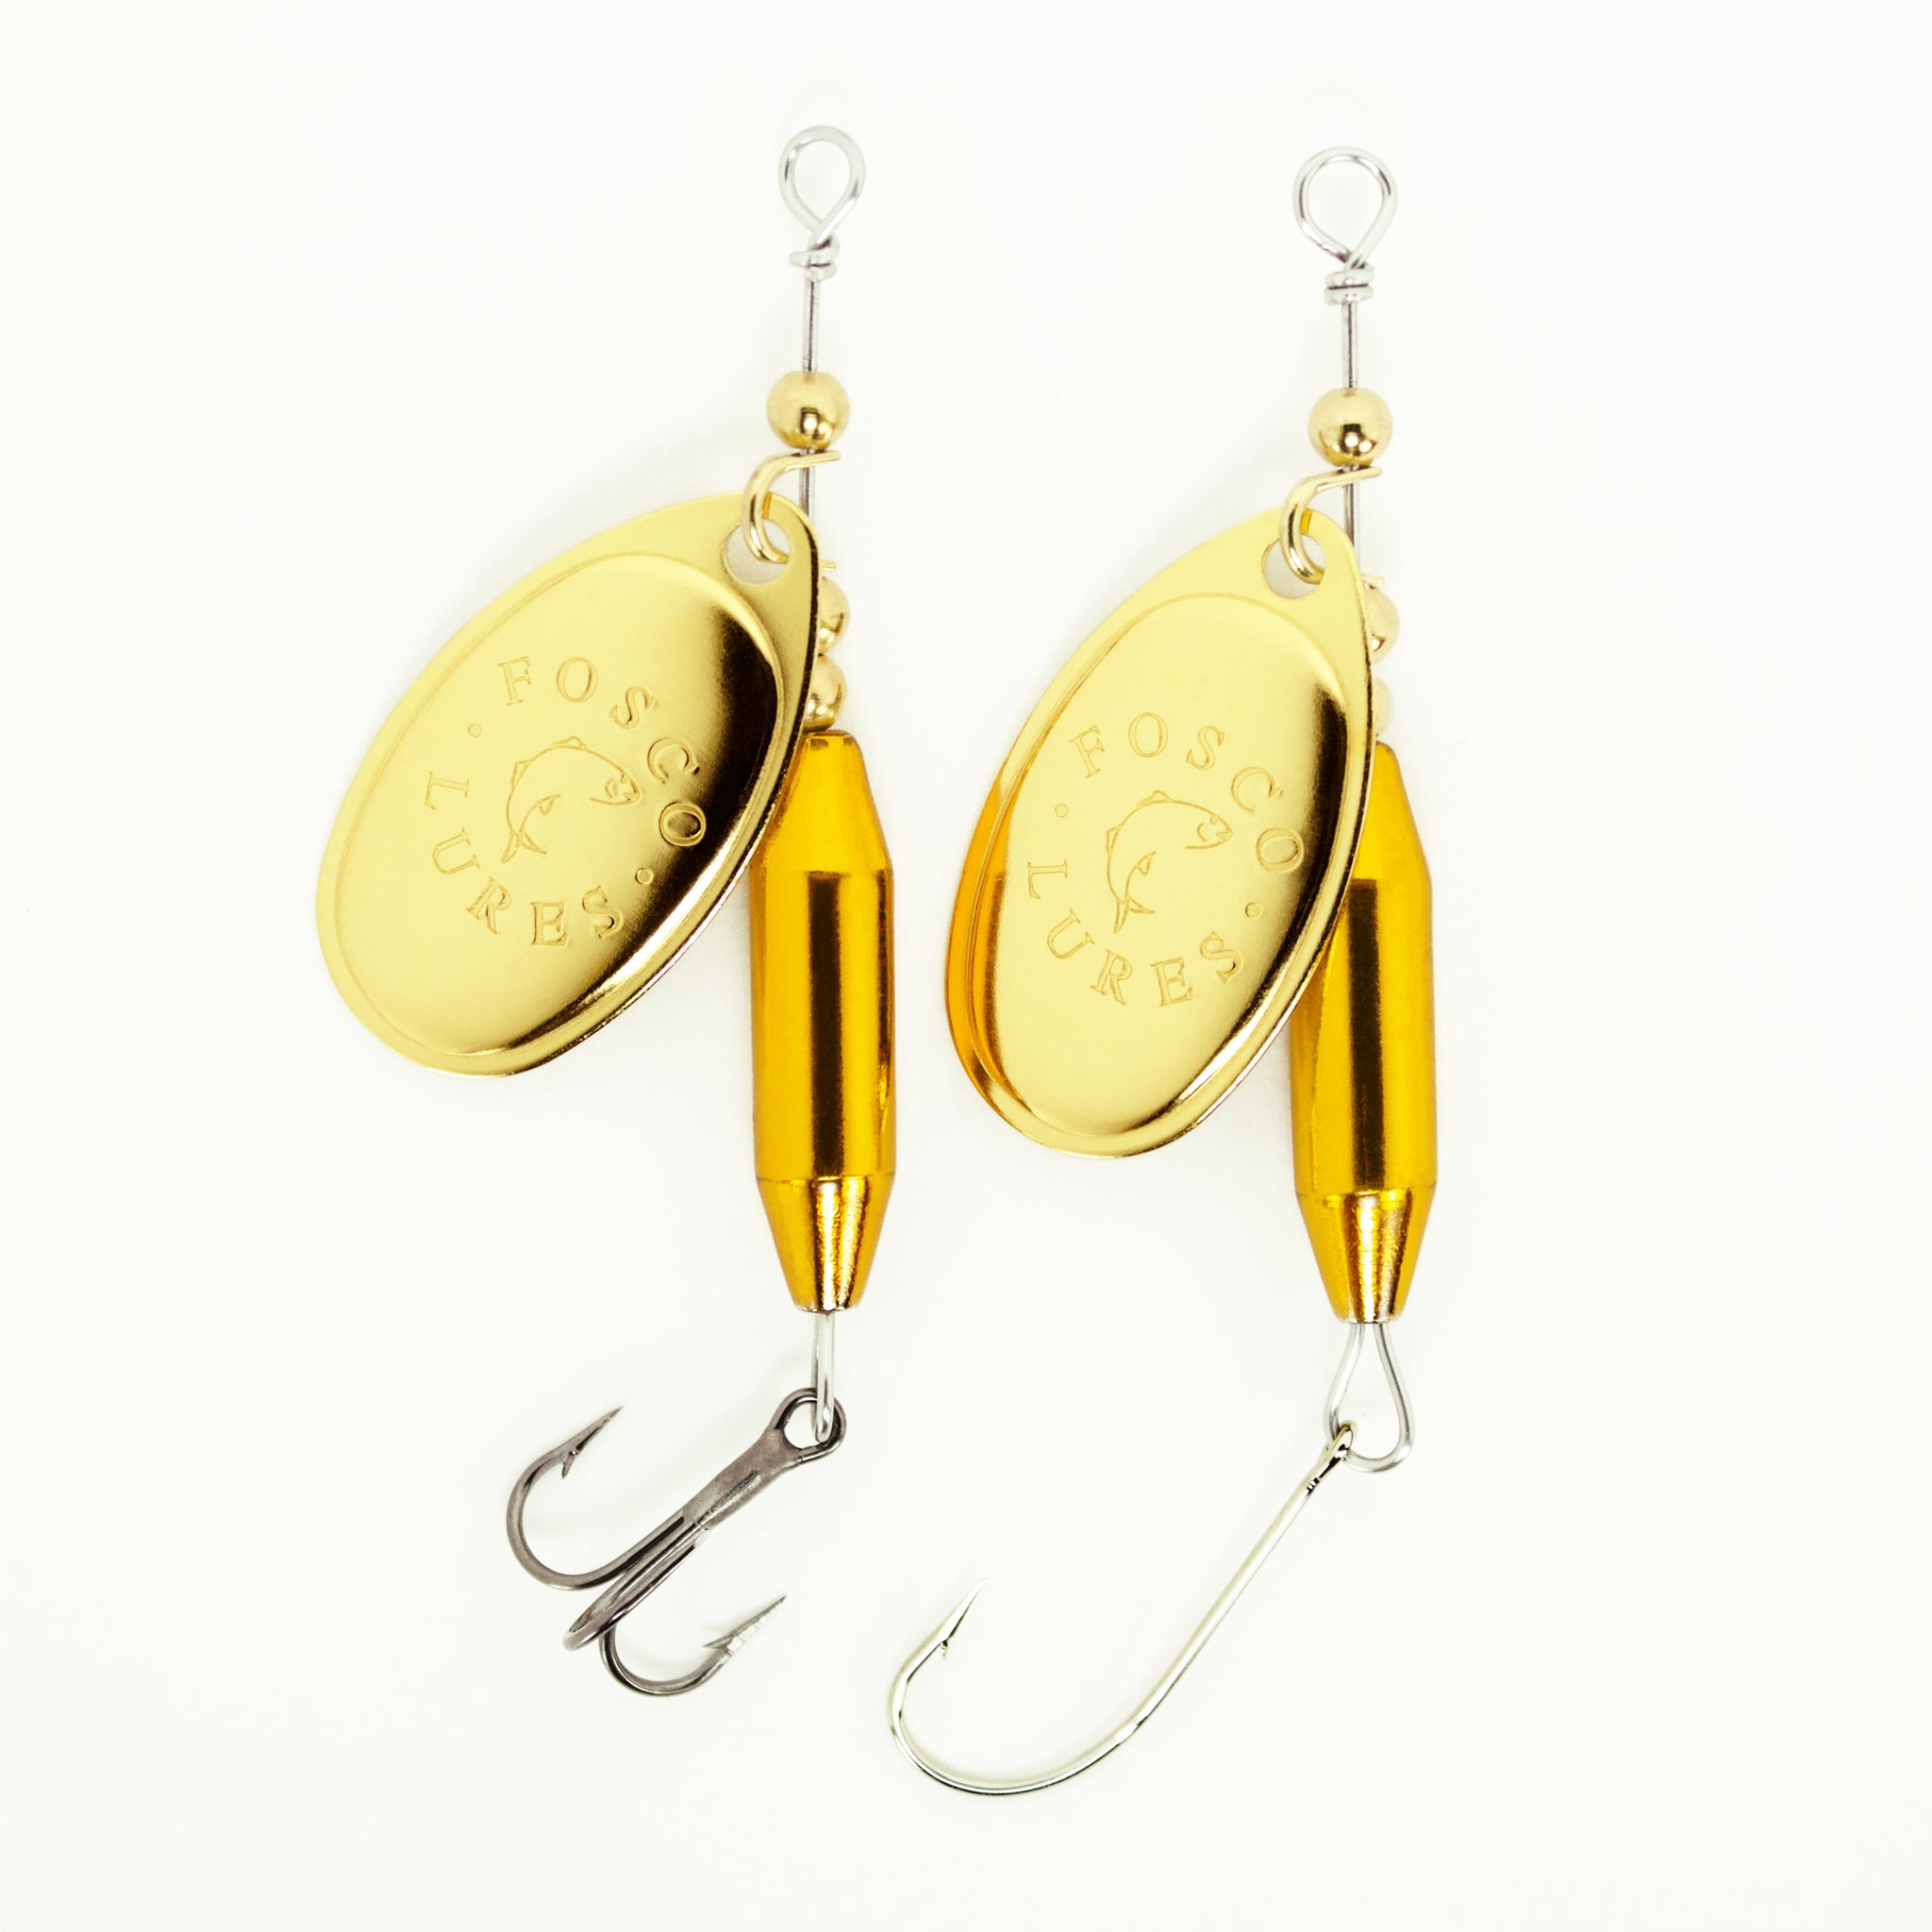 Fosco Handmade Fishing Lures • Fool's Gold Brass Inline Spinner • #3 •  Made By Hand In Canada – Fosco Fishing Lures